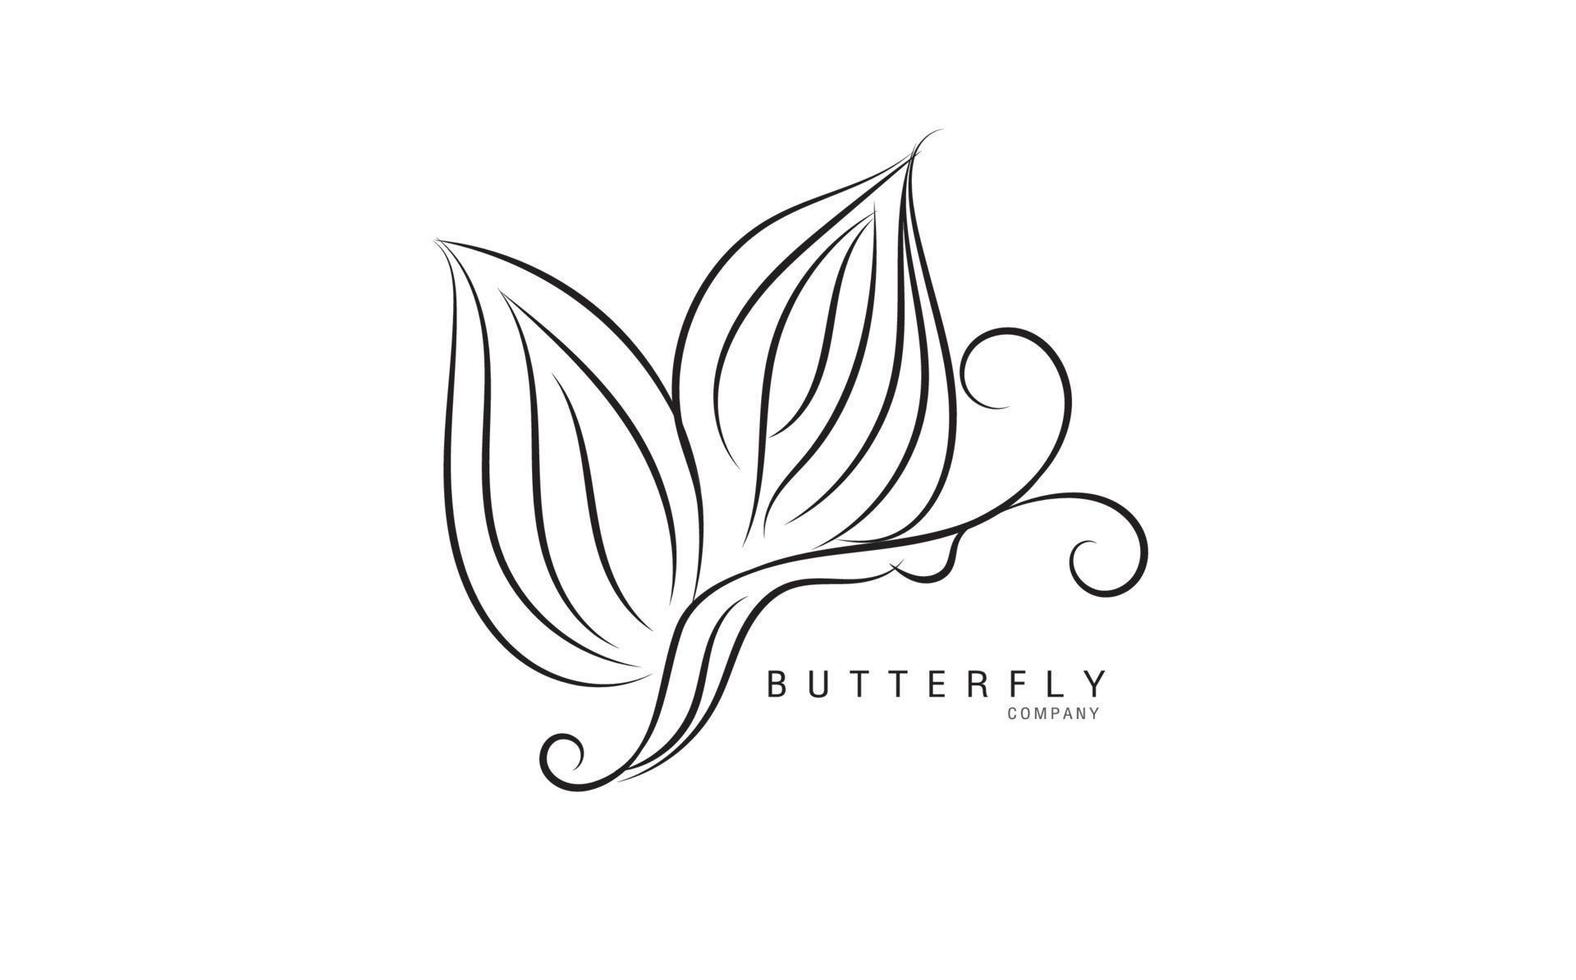 Butterfly logo vector template for cosmetic, beauty, spa. Black and white hand drawn butterfly illustration. vintage style